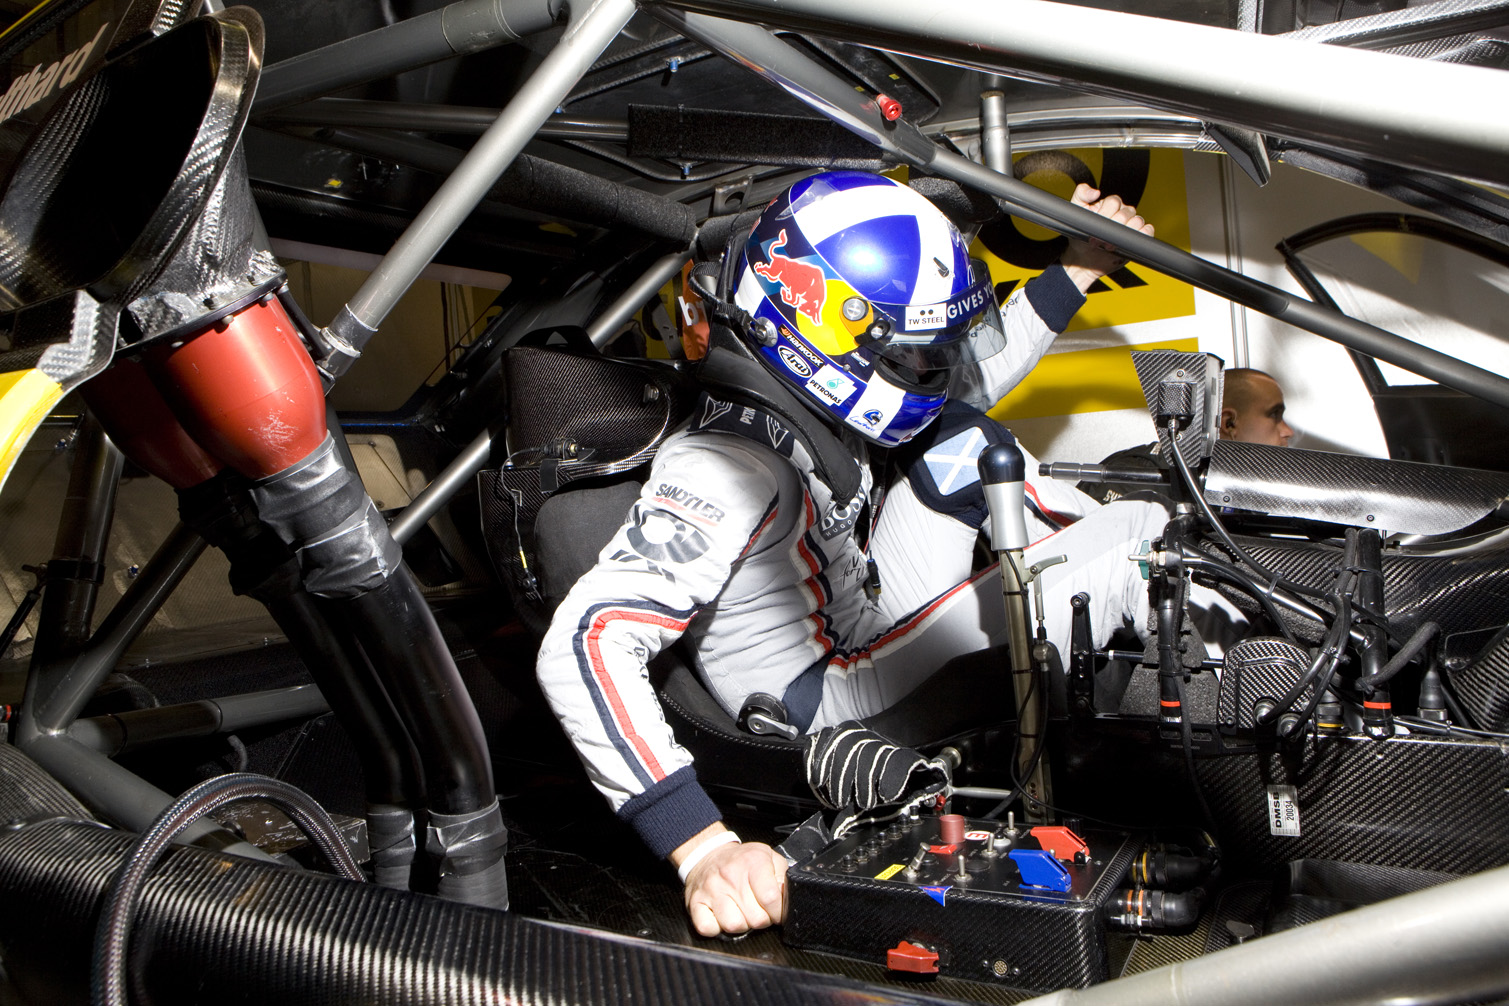 David Coulthard prepares for racing at the DTM series in Germany